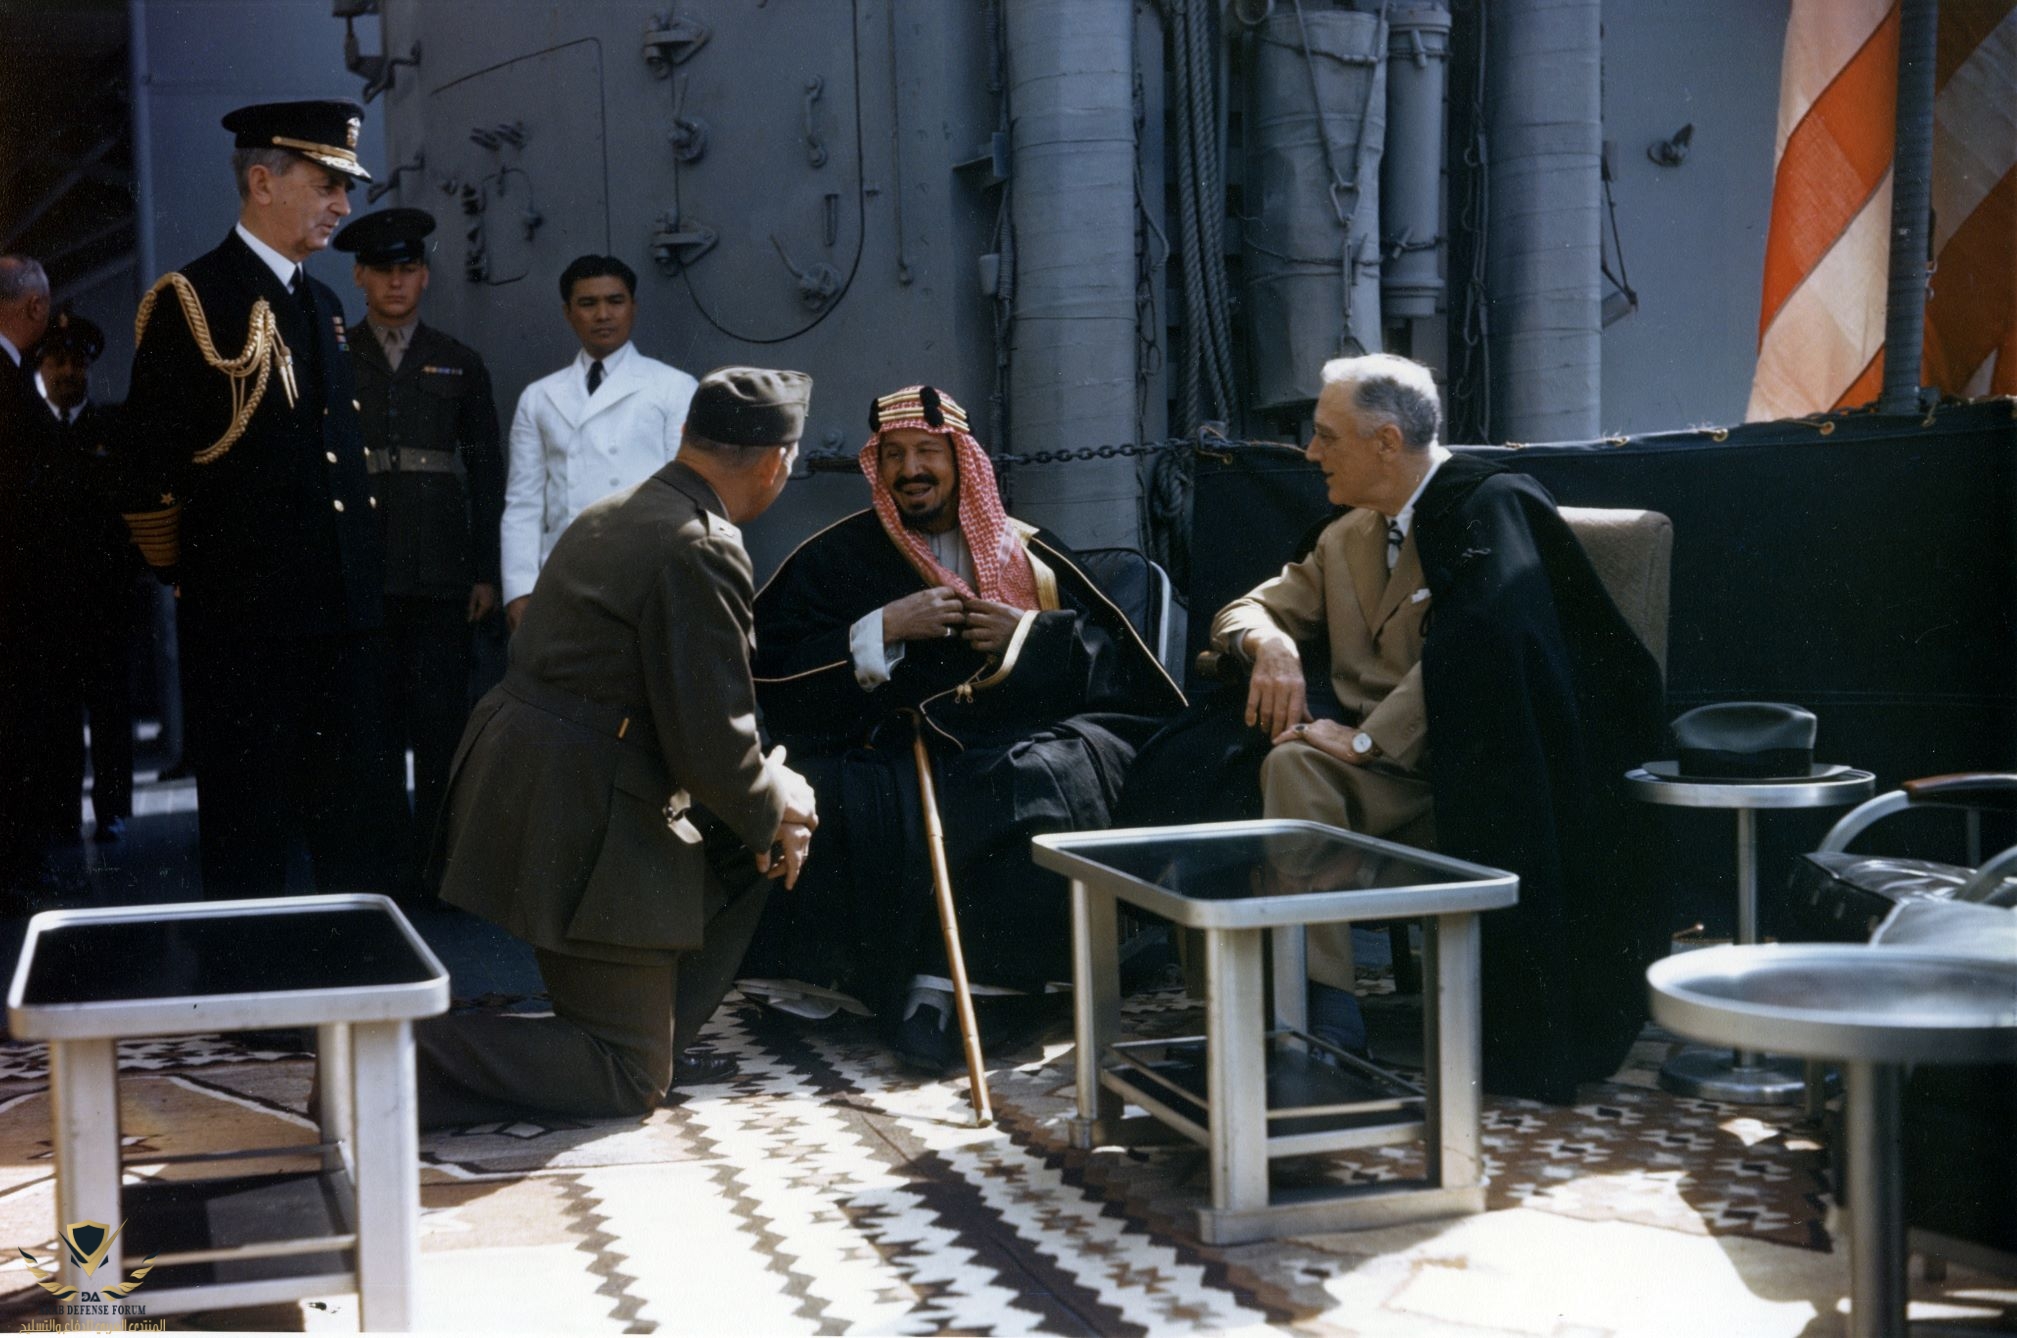 Franklin_D._Roosevelt_with_King_Ibn_Saud_aboard_USS_Quincy_(CA-71),_14_February_1945_(USA-C-545).jpg